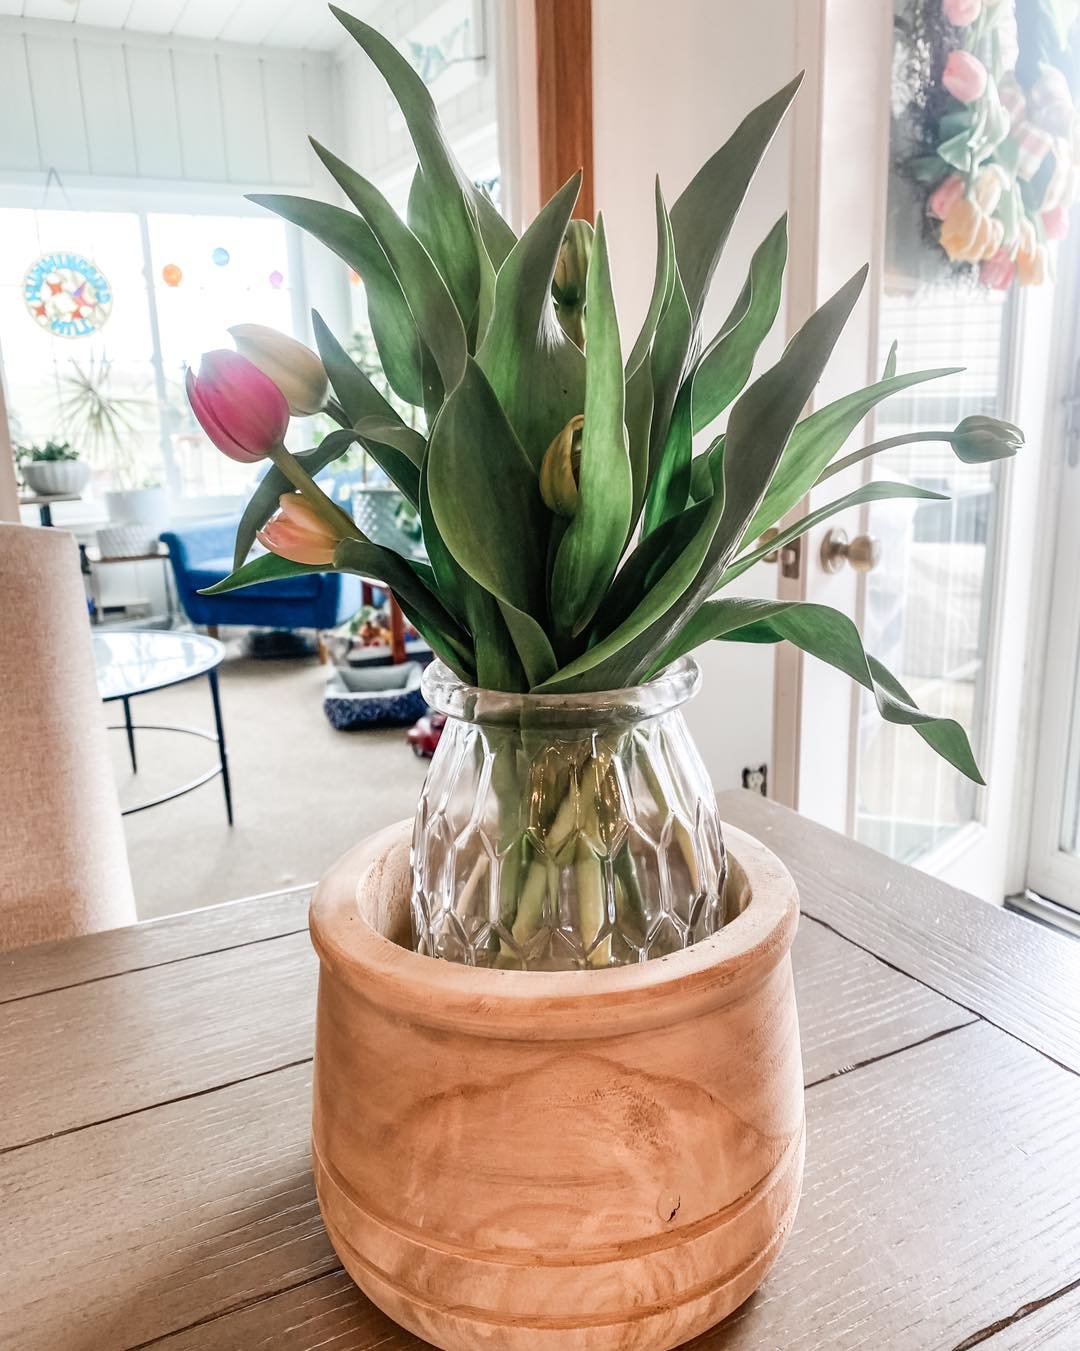 We have some of the most amazing customers.  This beautiful wooden vase was gifted to me by a regular who always brightens every day we see her. 

Thank you Birgit and Paul for popping in for some tulips and blessing us with this beautiful vessel.  I